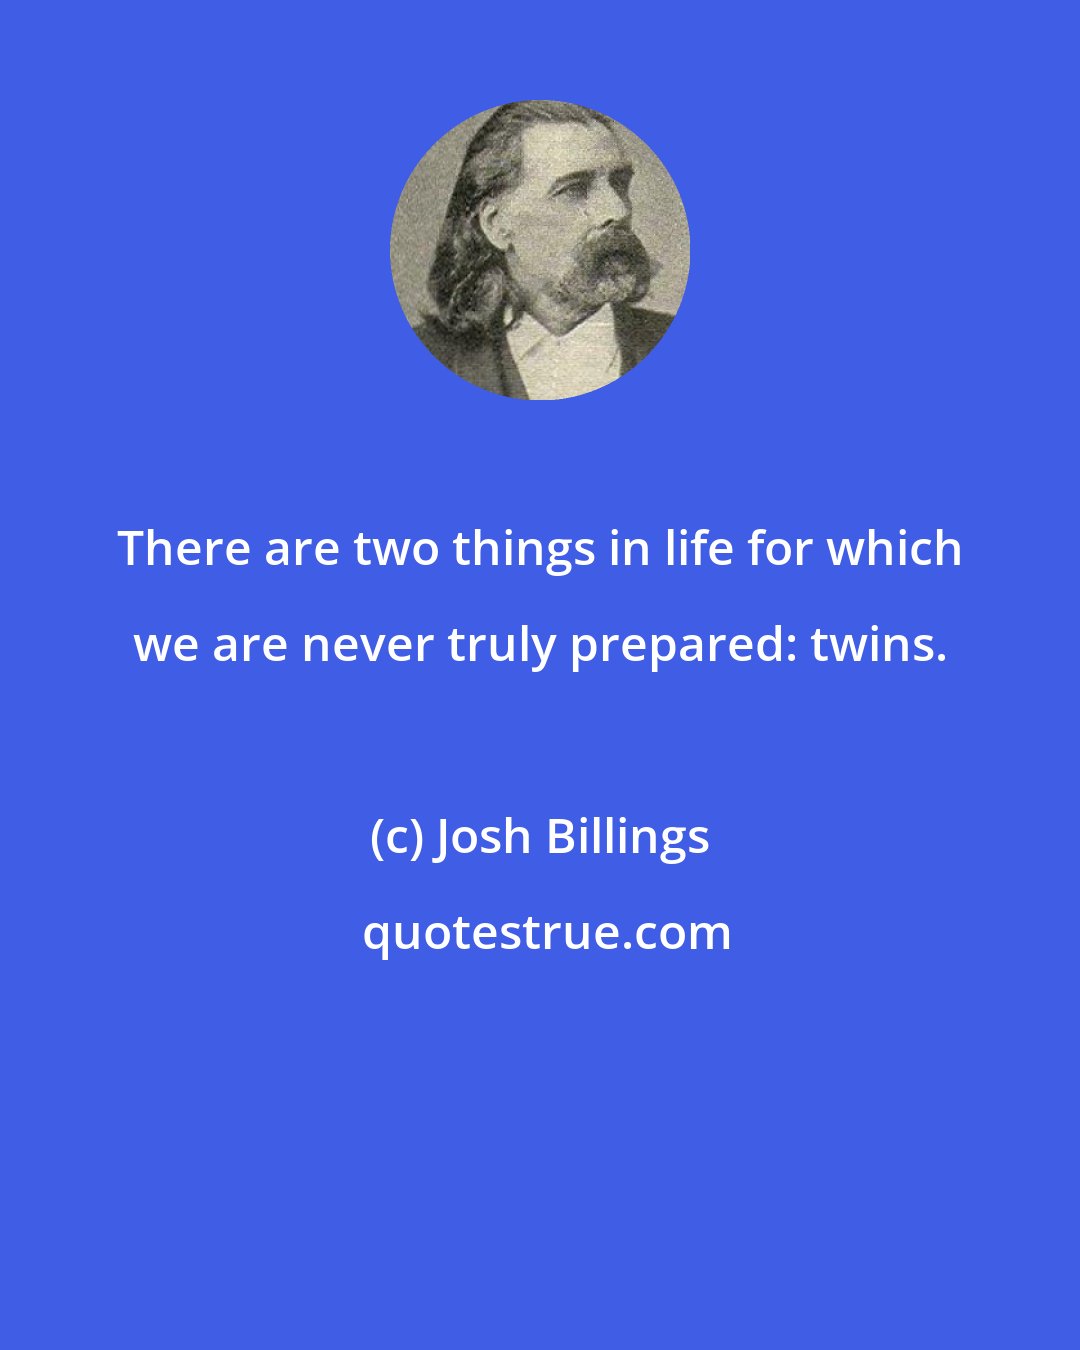 Josh Billings: There are two things in life for which we are never truly prepared: twins.